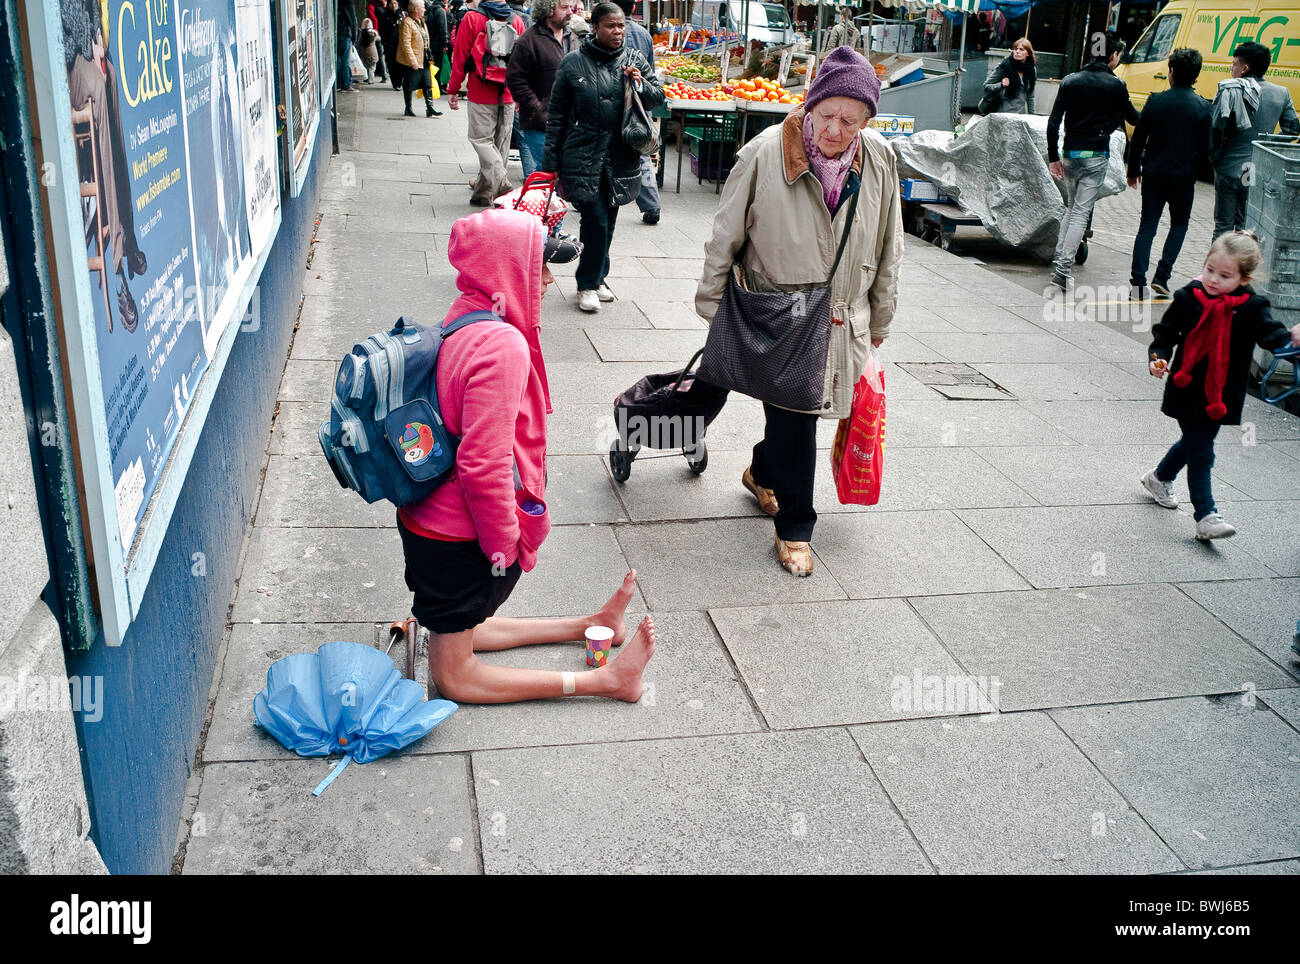 A man with a serious leg deformity begs on Moore street as an old woman and child walk past. Stock Photo